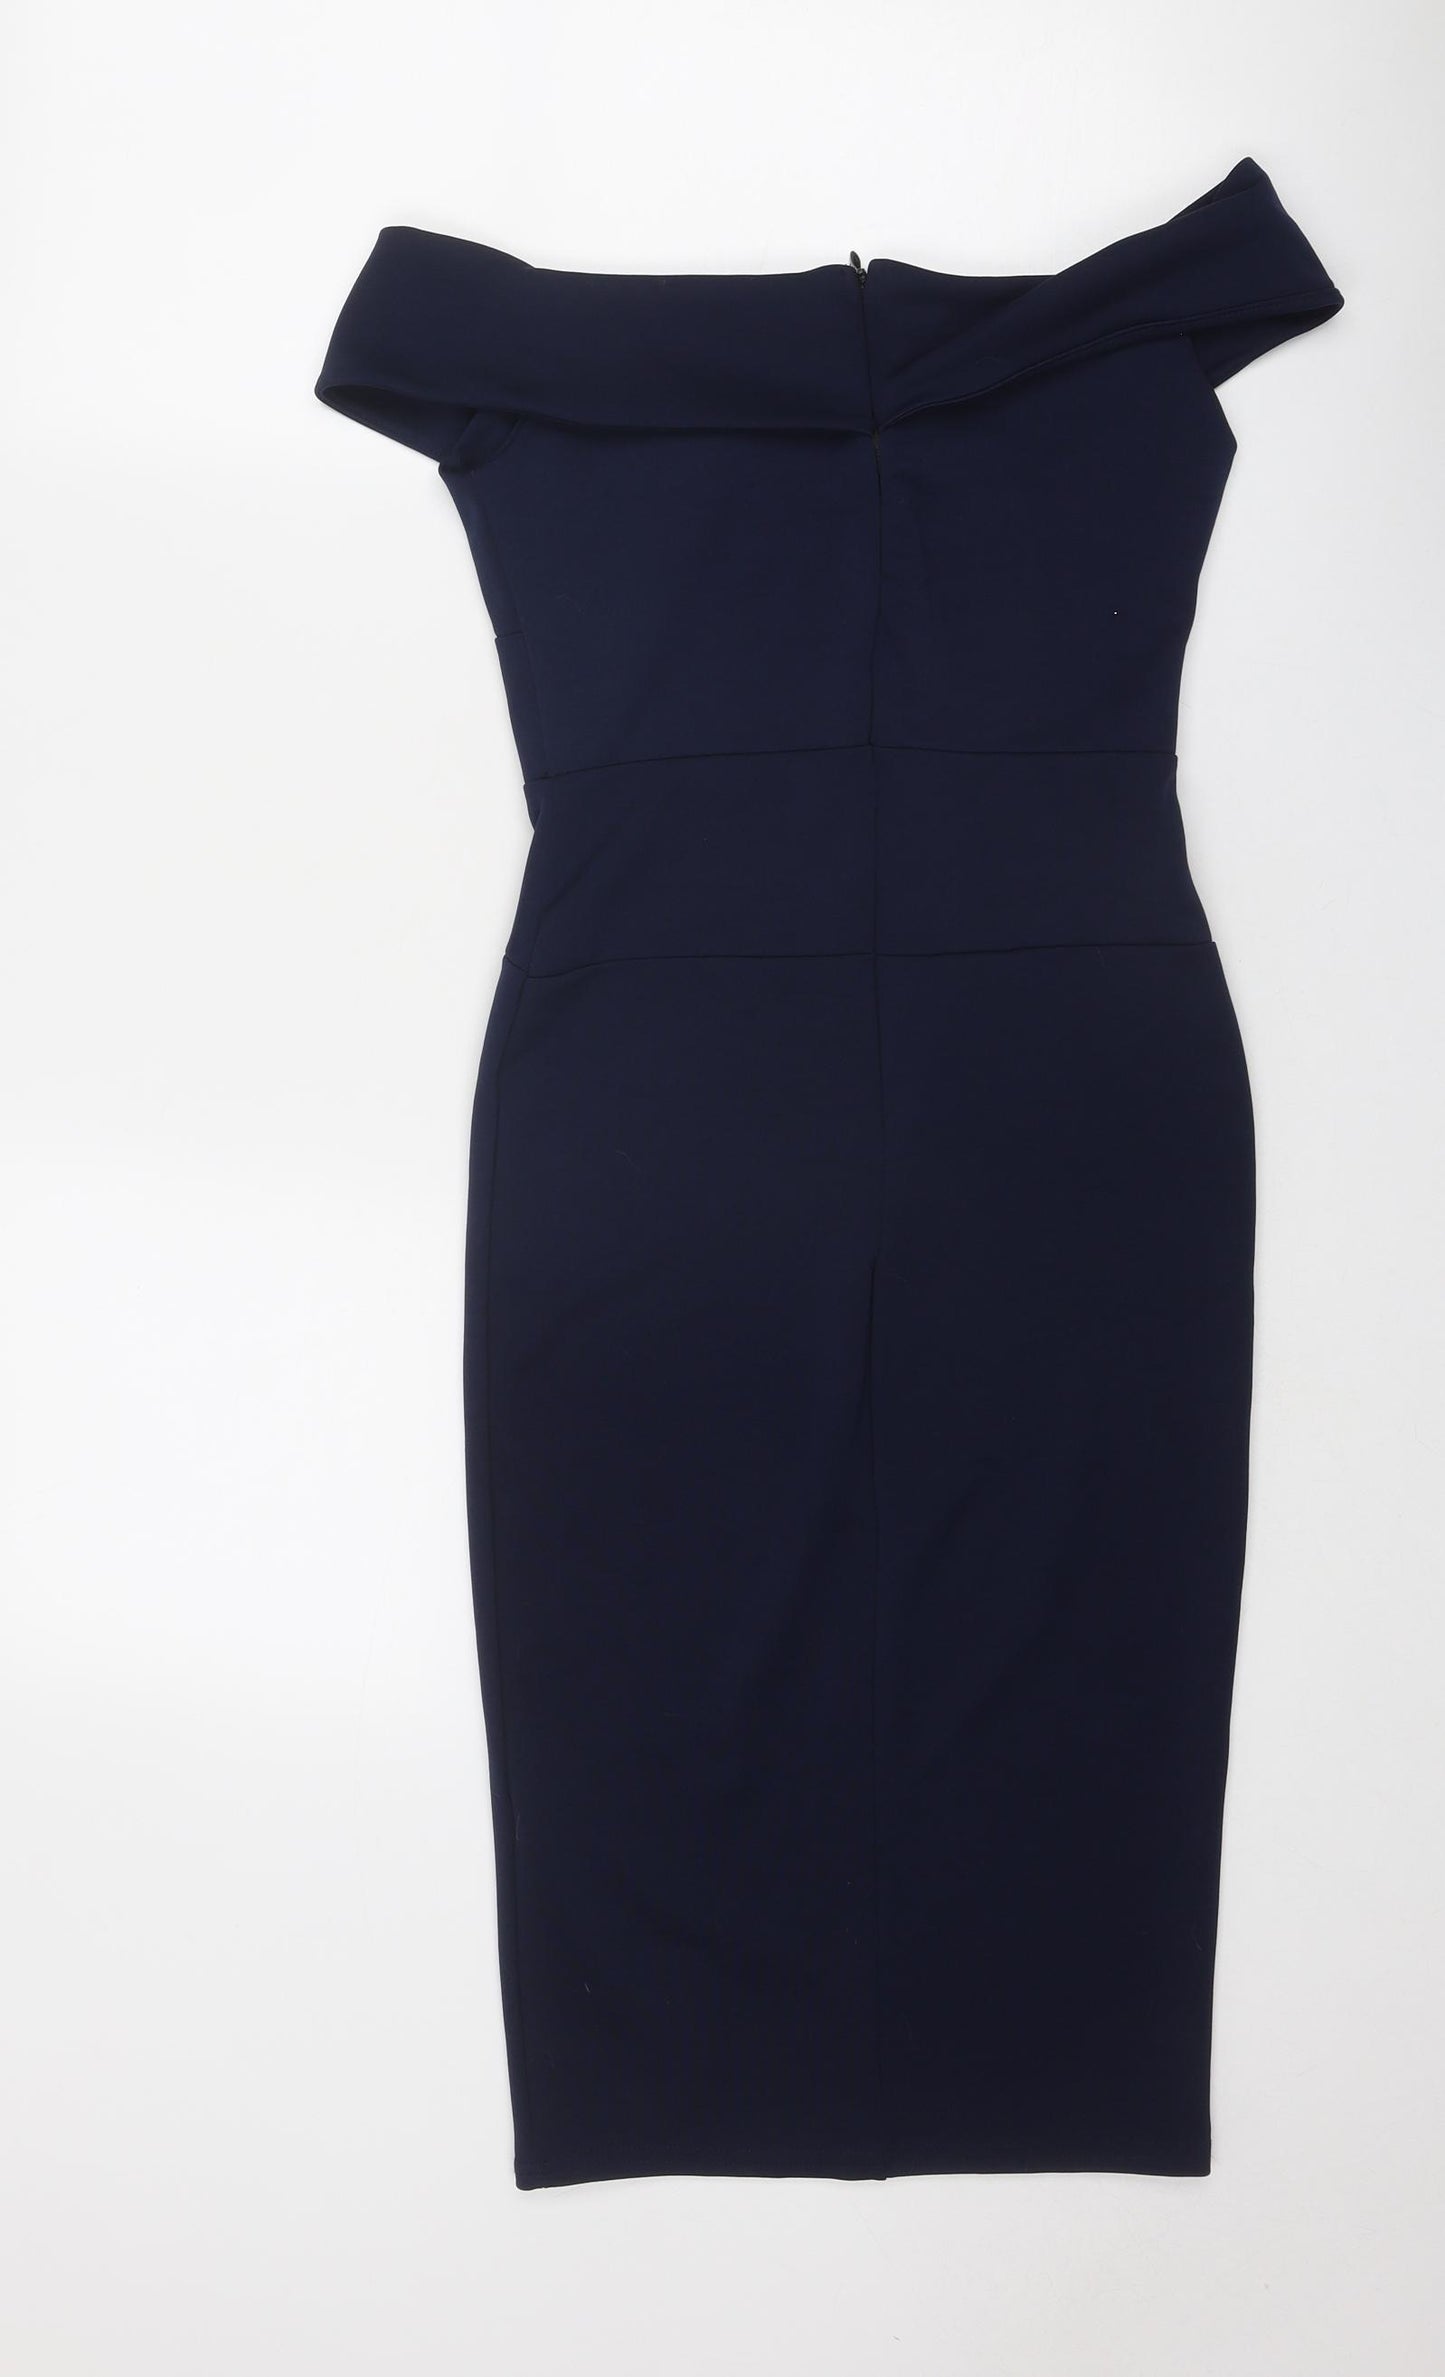 Boohoo Womens Blue Polyester Bodycon Size 10 Off the Shoulder Zip